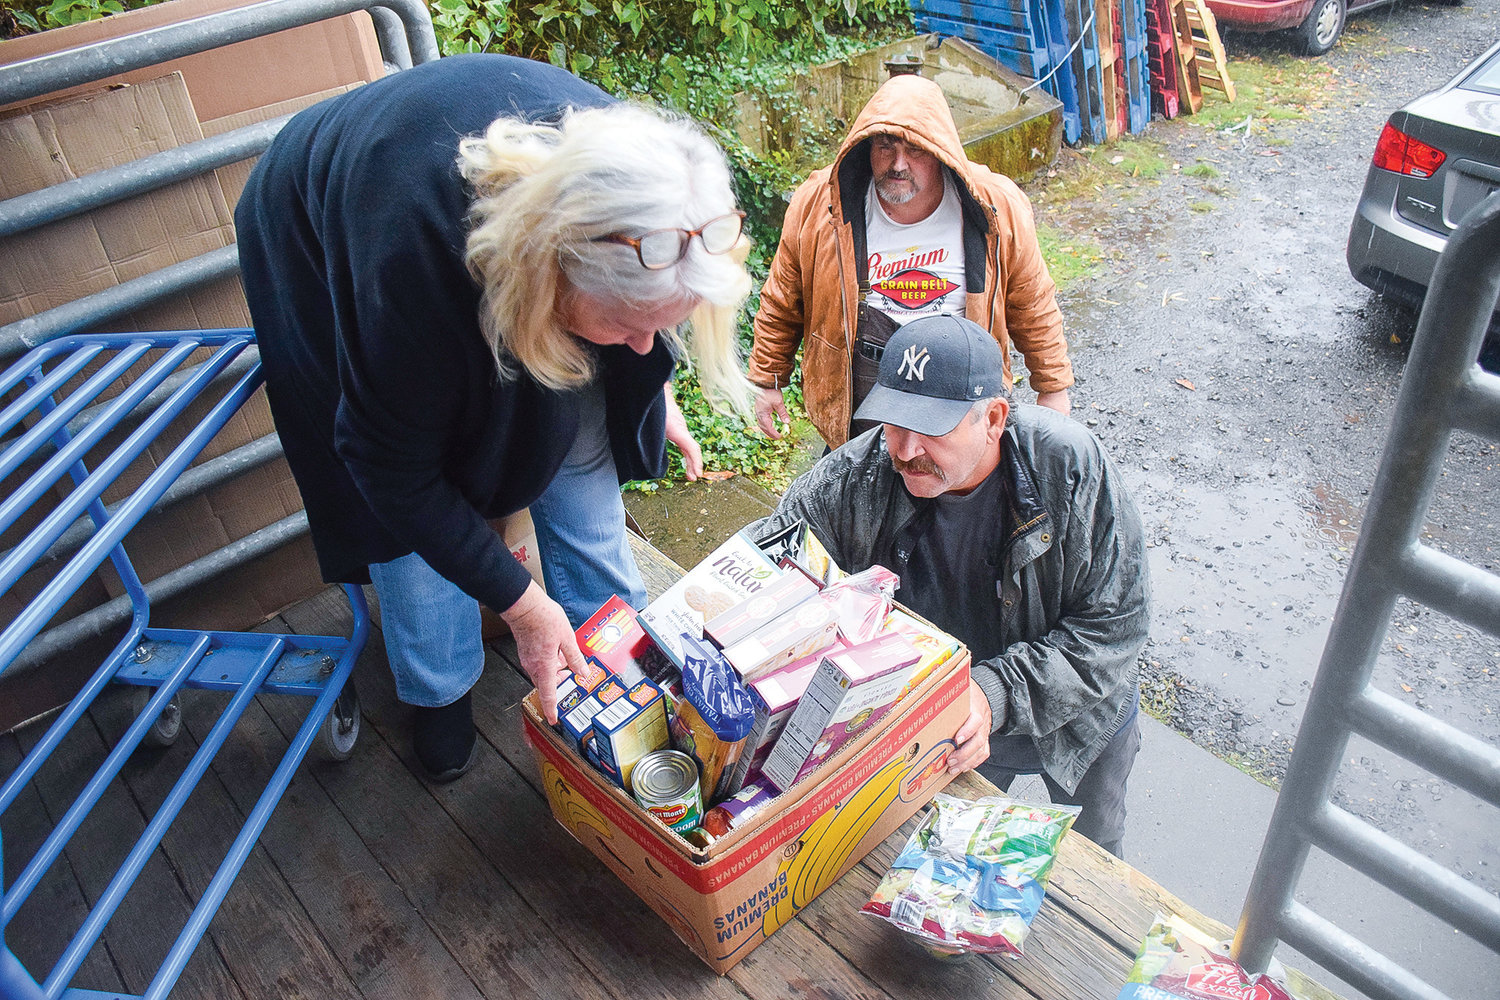 Neighbors Helping Neighbors food bank coordinator Pam Bong, left, hands a food box to volunteers Kevin Jochim, bottom, and Jeff Johnson so it can be placed in a vehicle at the food bank on Nov. 22.